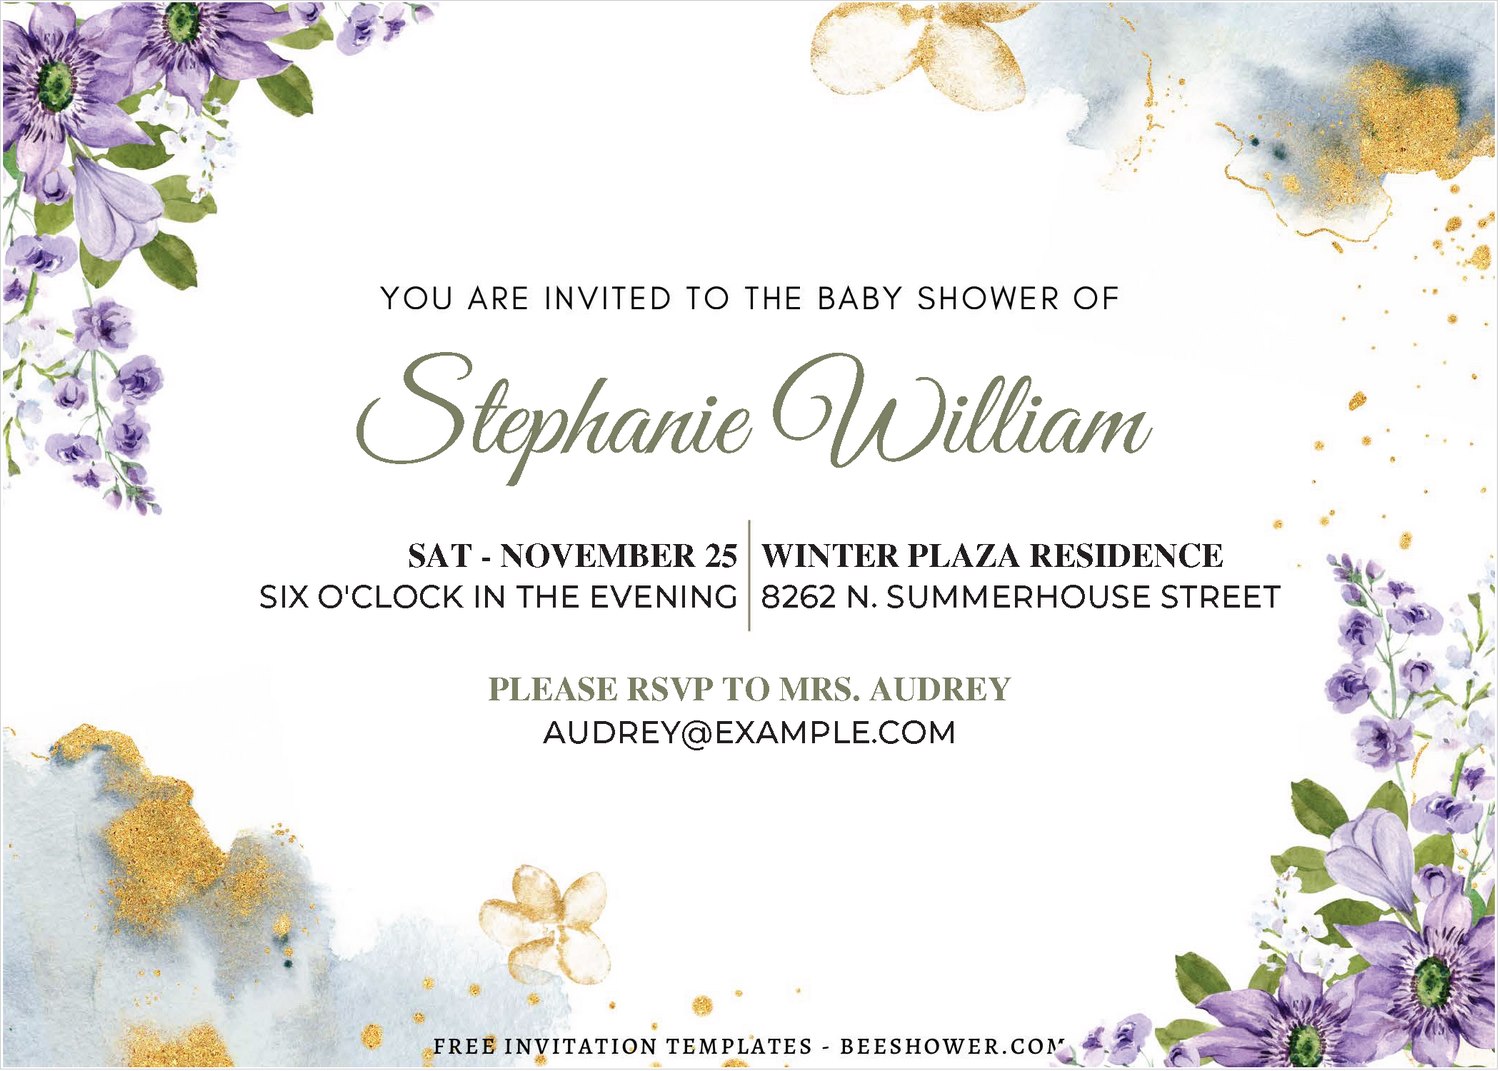 (Free Editable PDF) Dreamy Rustic Spring Baby Shower Invitation Templates A